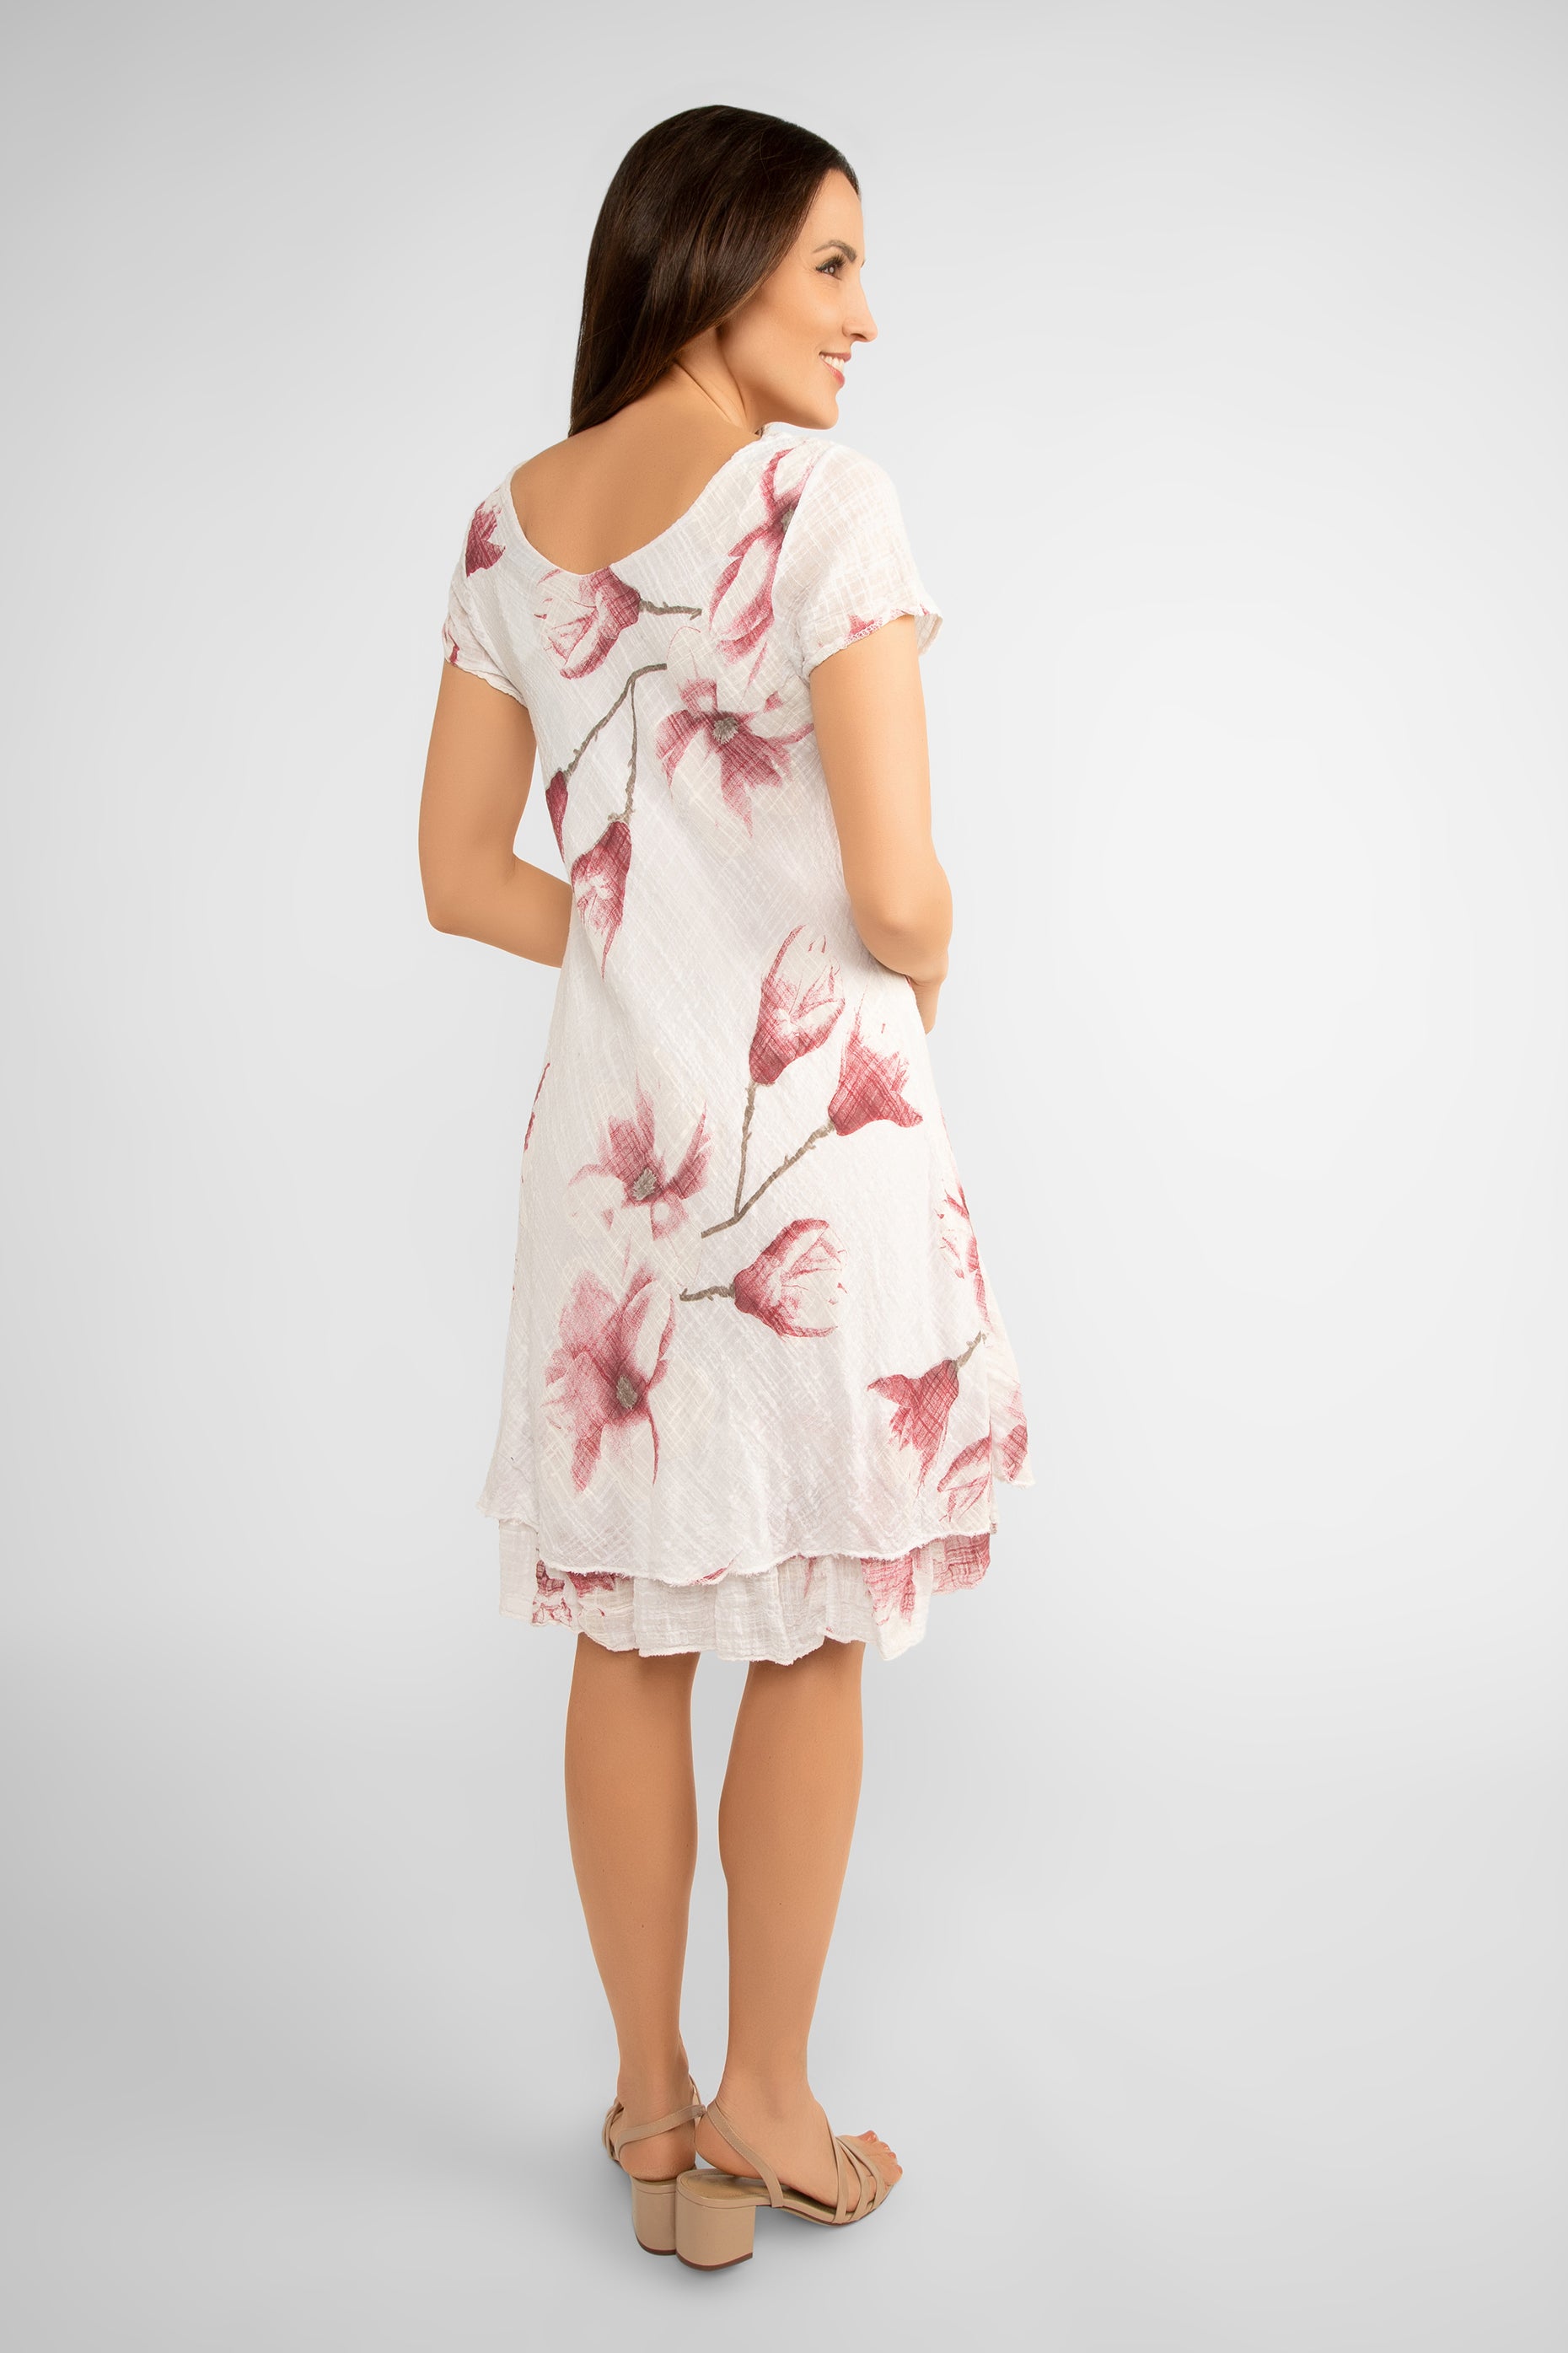 Back view of Bella Amore (6859A) Women's Short Sleeve V-Neck Knee Length Cotton Dress with Tiered Skirt in White and Pink Florals